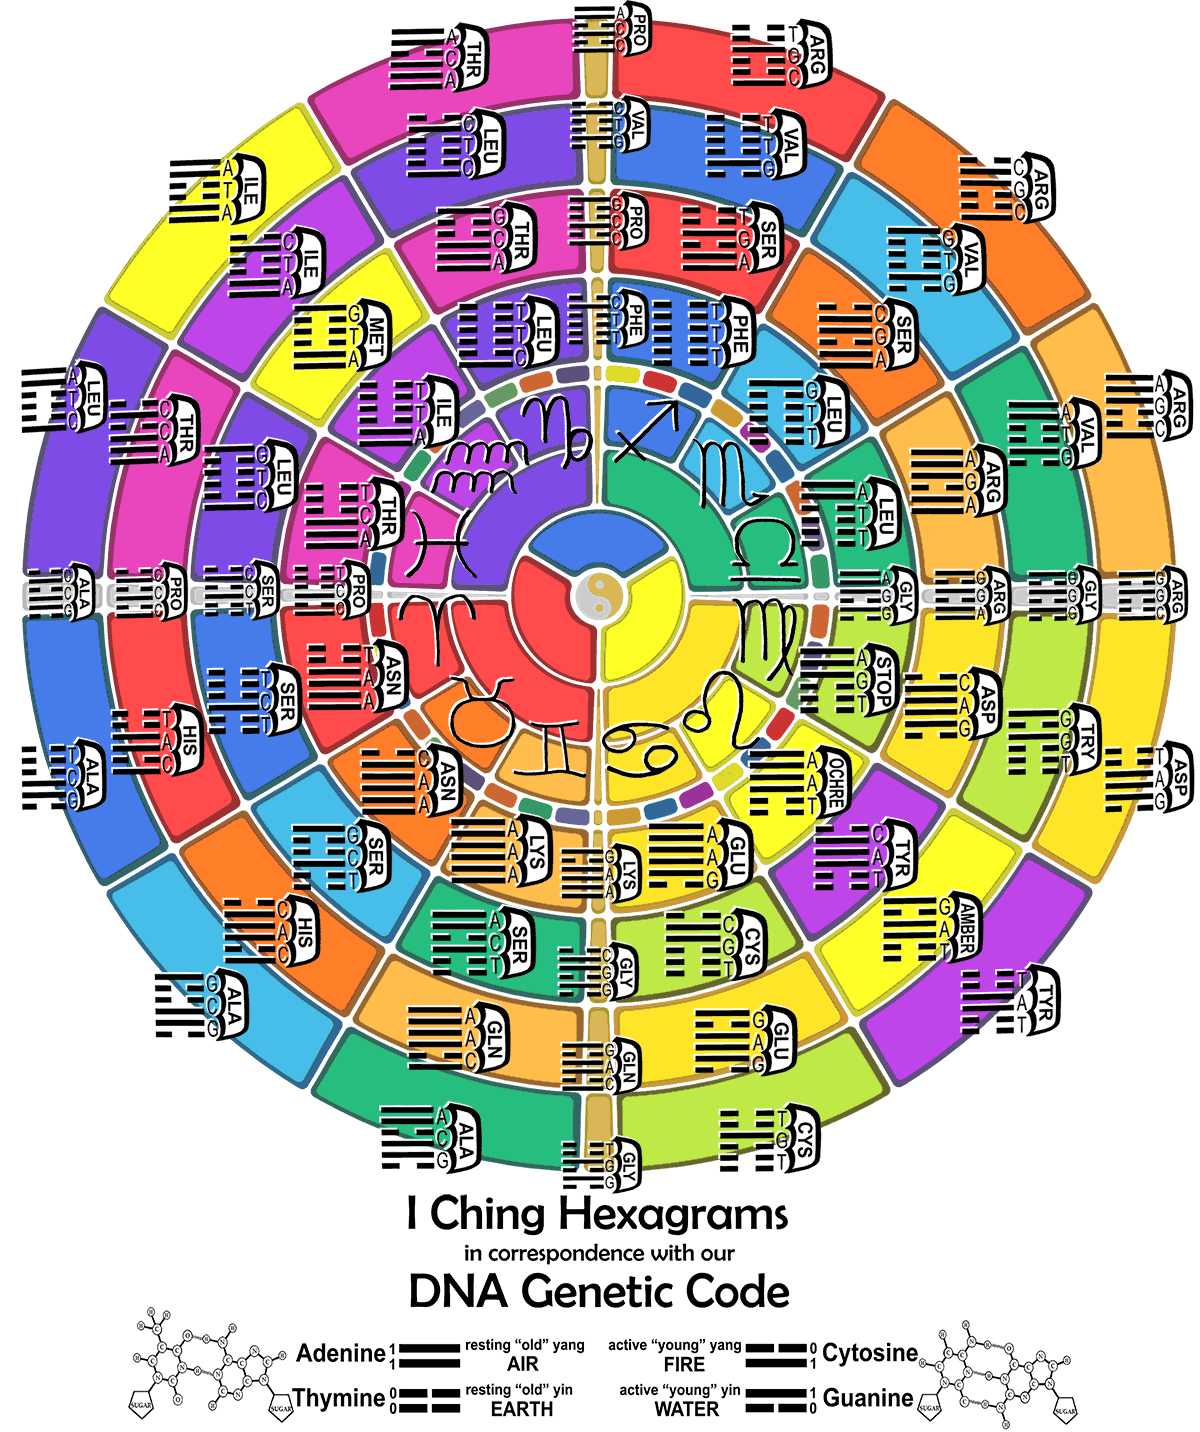 DNA and I Ching on World Clock